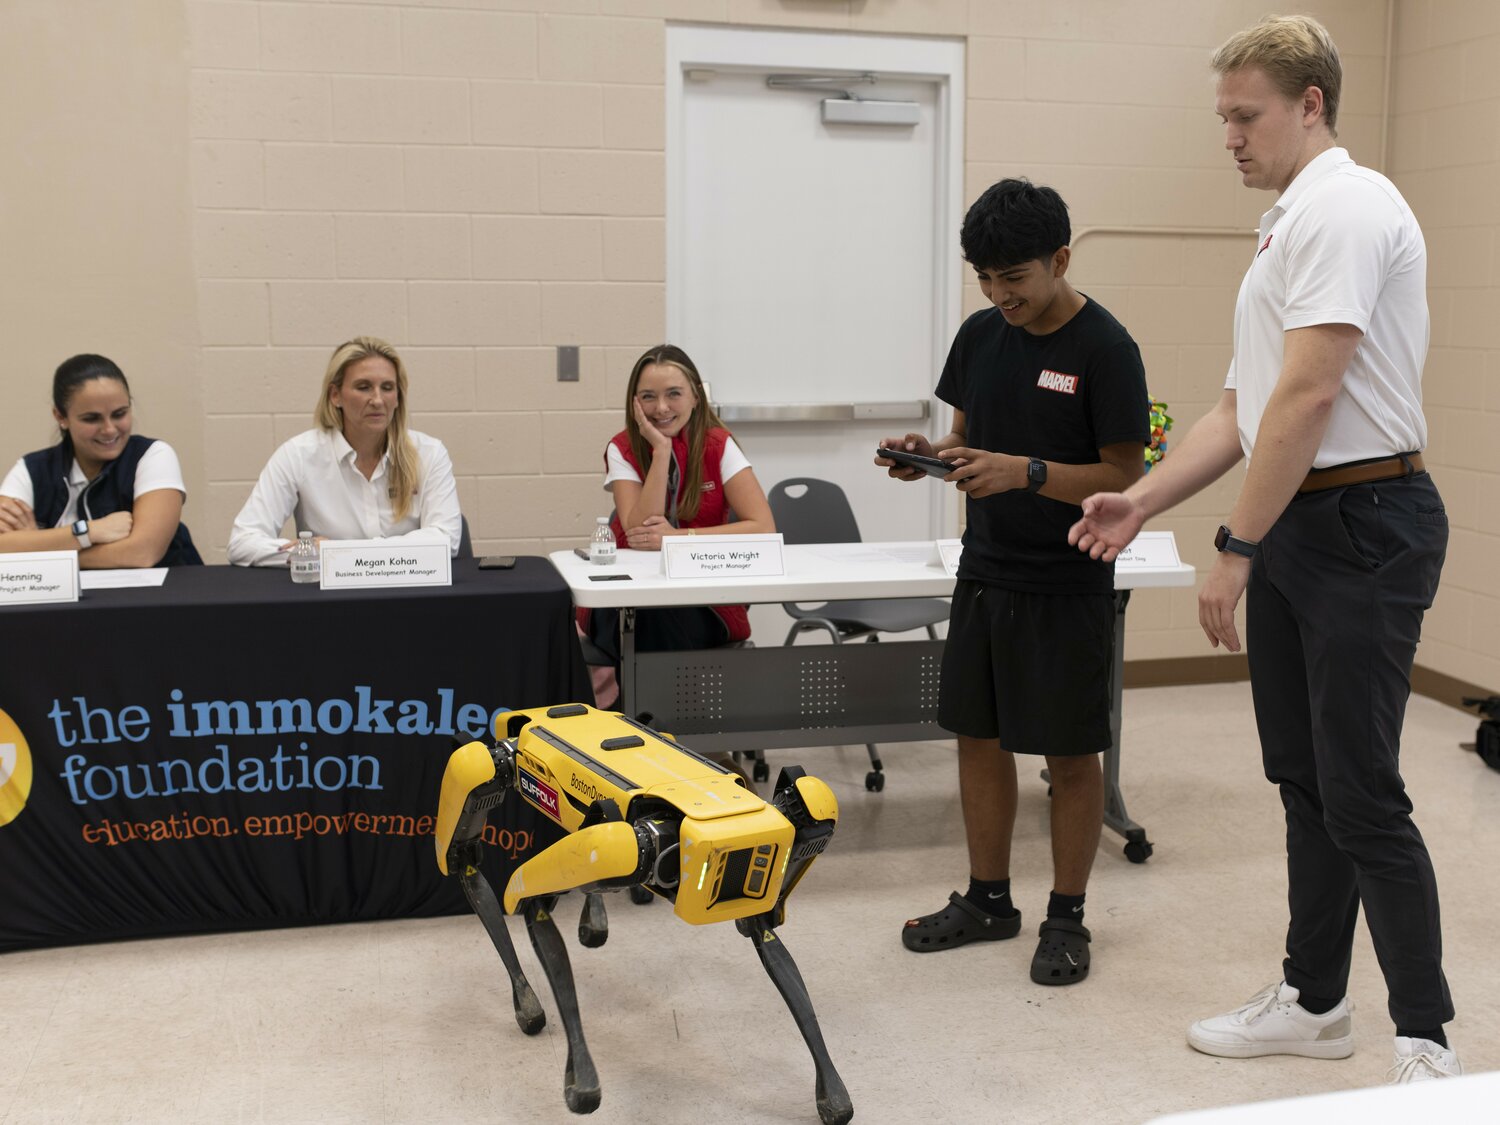 A student experiences the abilities of Spot, the Robot Dog during the “Business, Construction and Engineering Career Pathway” event presented by the Immokalee Foundation on Dec. 7.